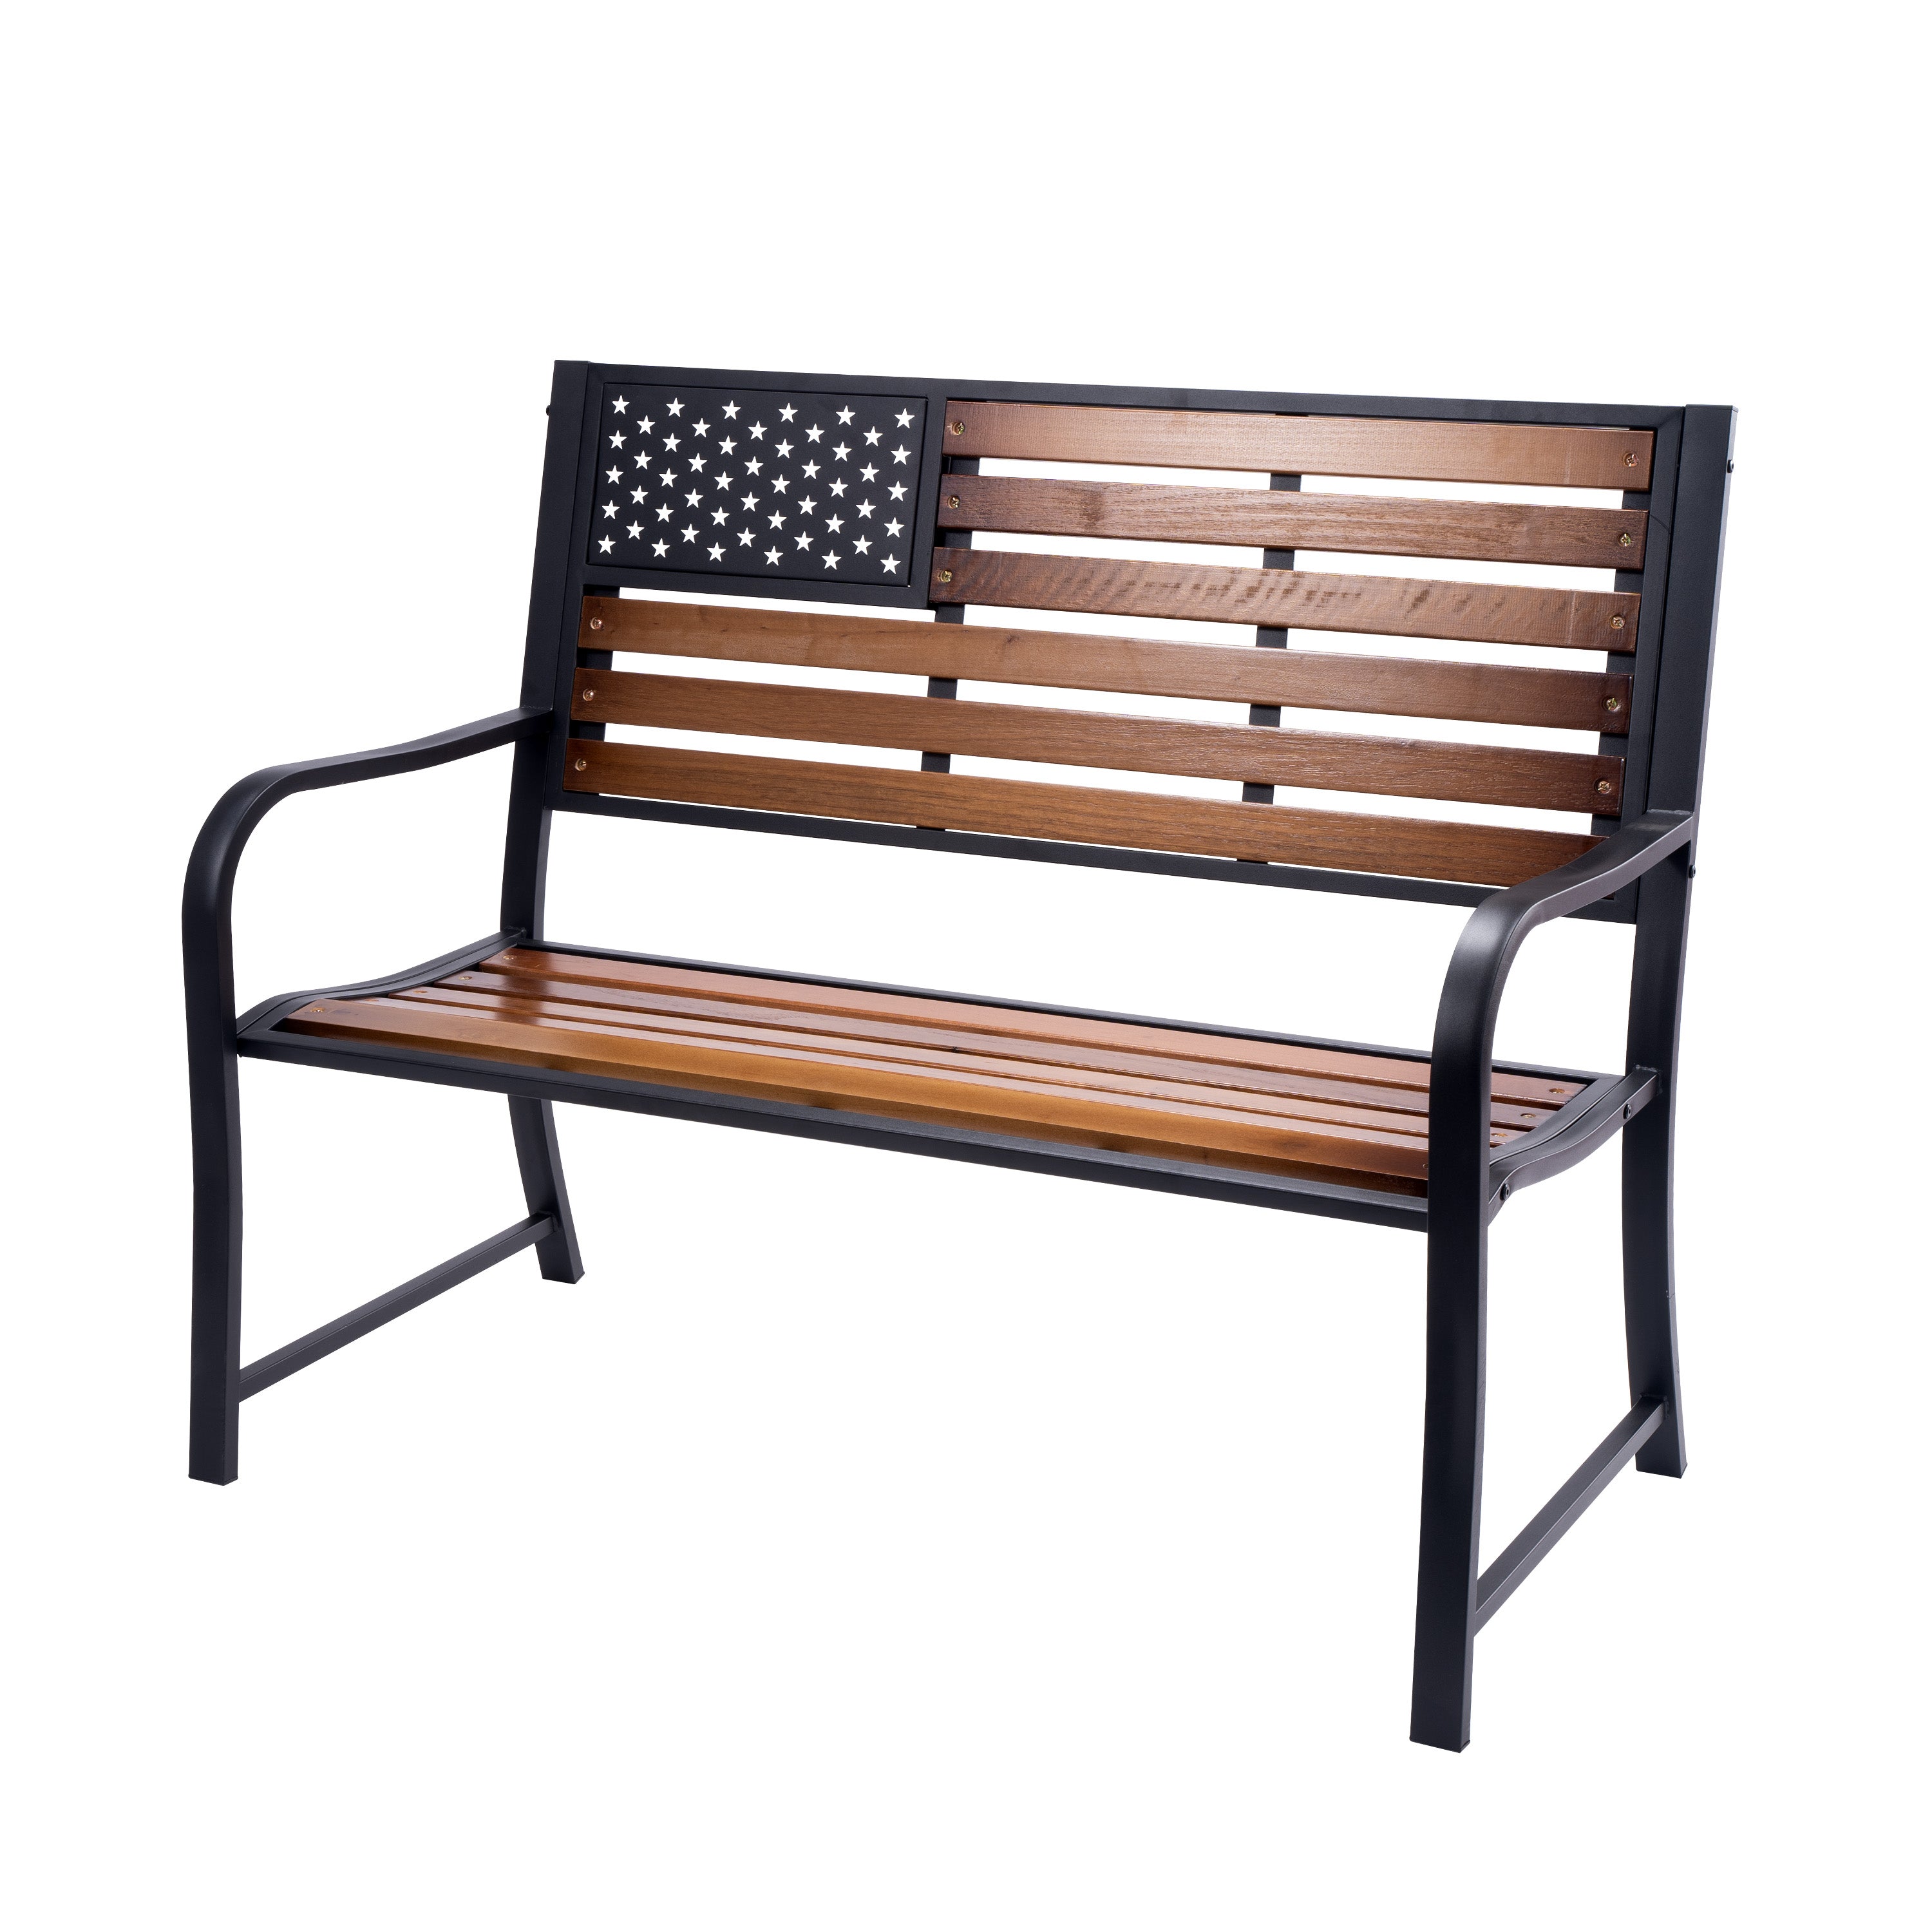 Metal American Flag Porch Bench with Wooden Slats